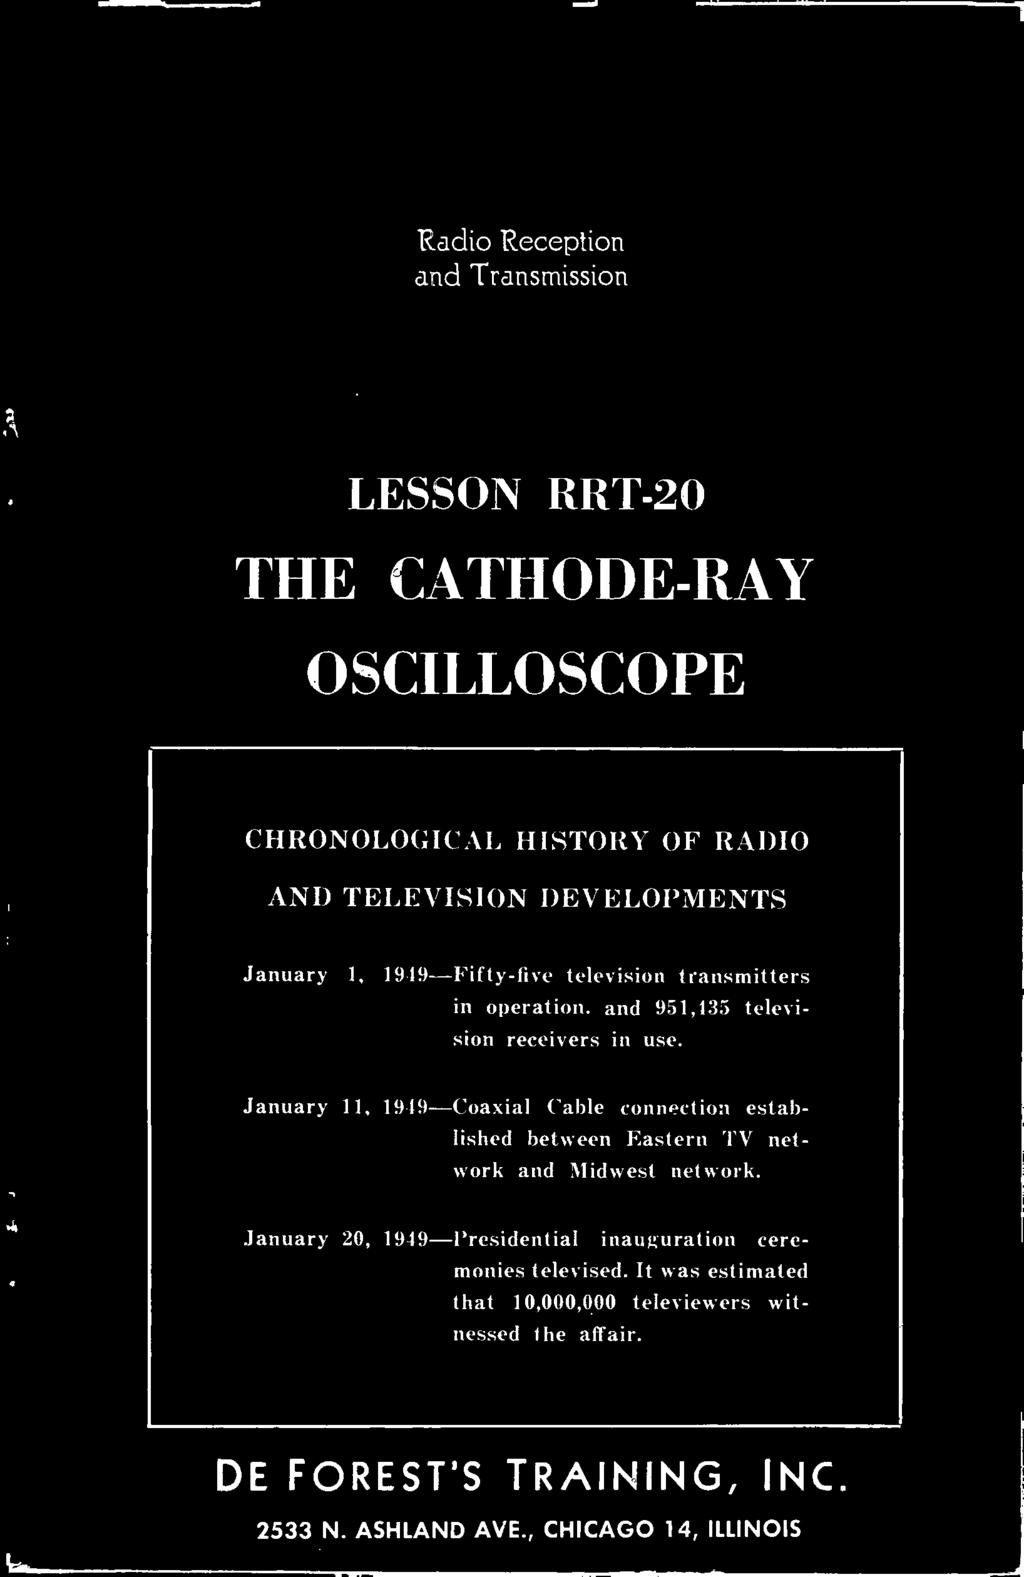 Radio Reception and Transmission LESSON RRT -20 THE CATHODE -RAY OSCILLOSCOPE CHRONOLOGICAL HISTORY OF RADIO AND TELEVISION DEVELOPMENTS January 1, 1949 -Fifty -five television transmitters in